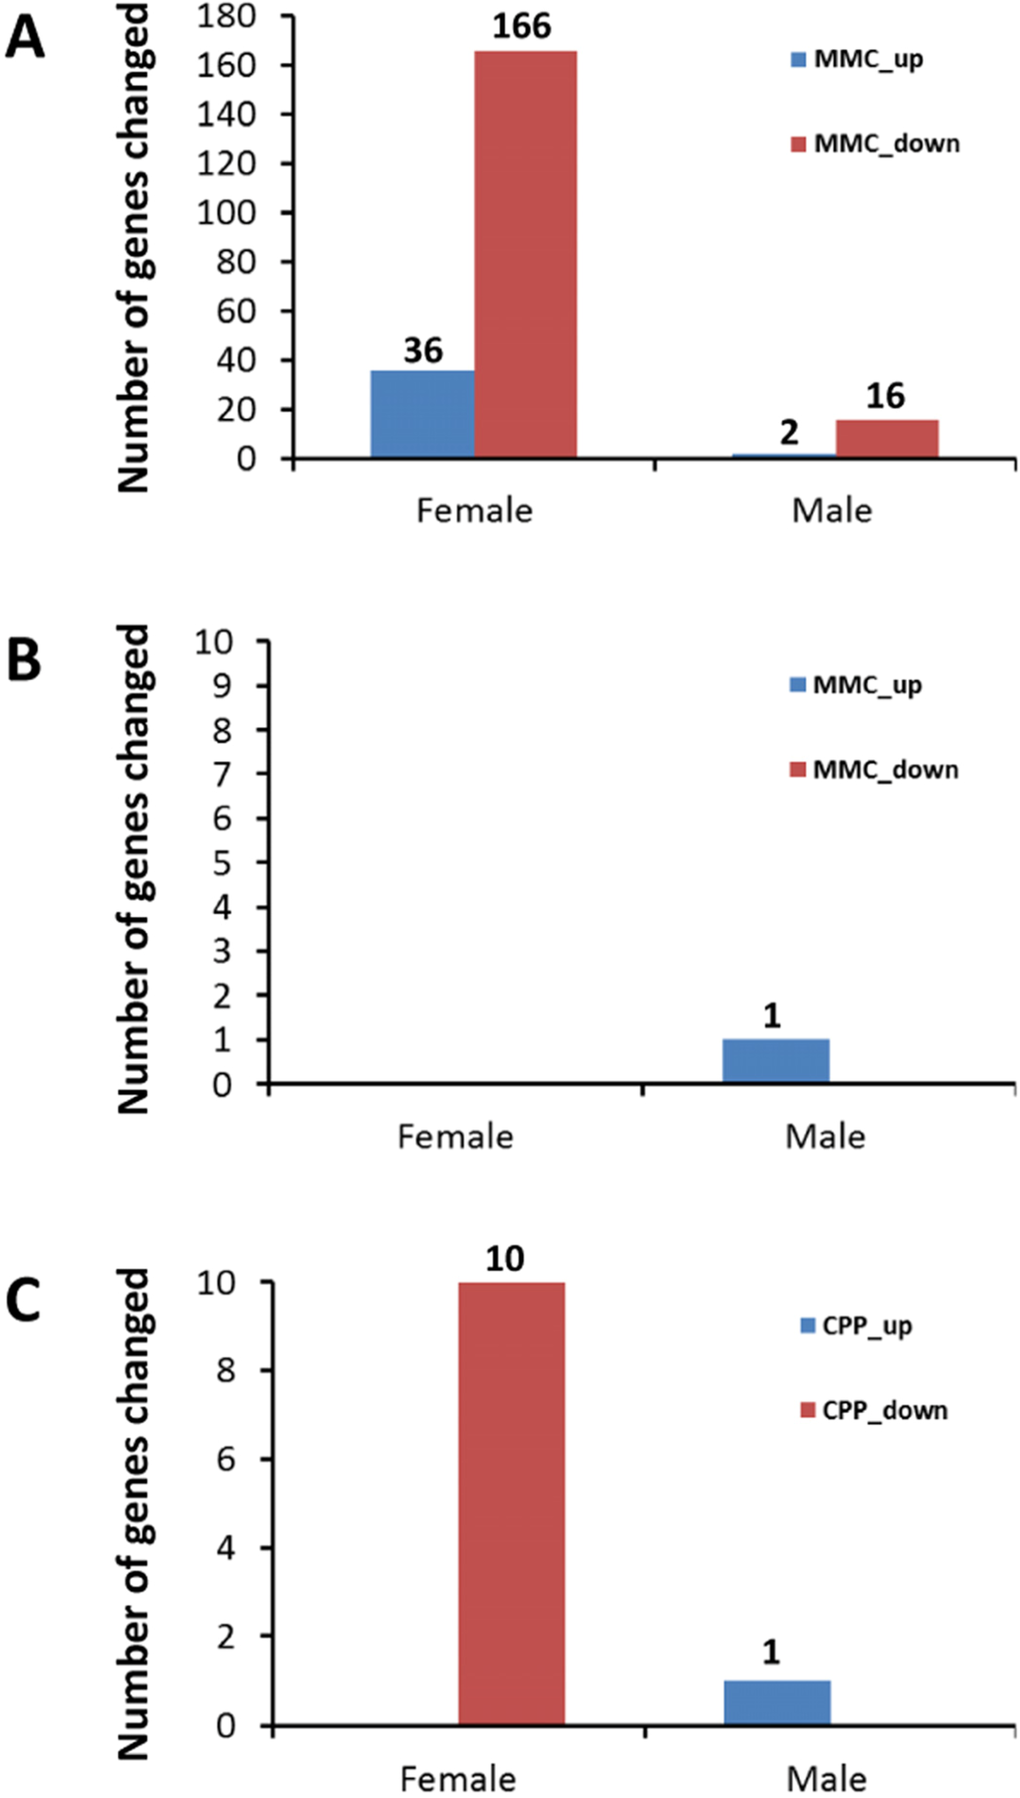 Number of up- and downregulated genes in the prefrontal cortex and hippocampus of male and female animals exposed to MMC or CPP